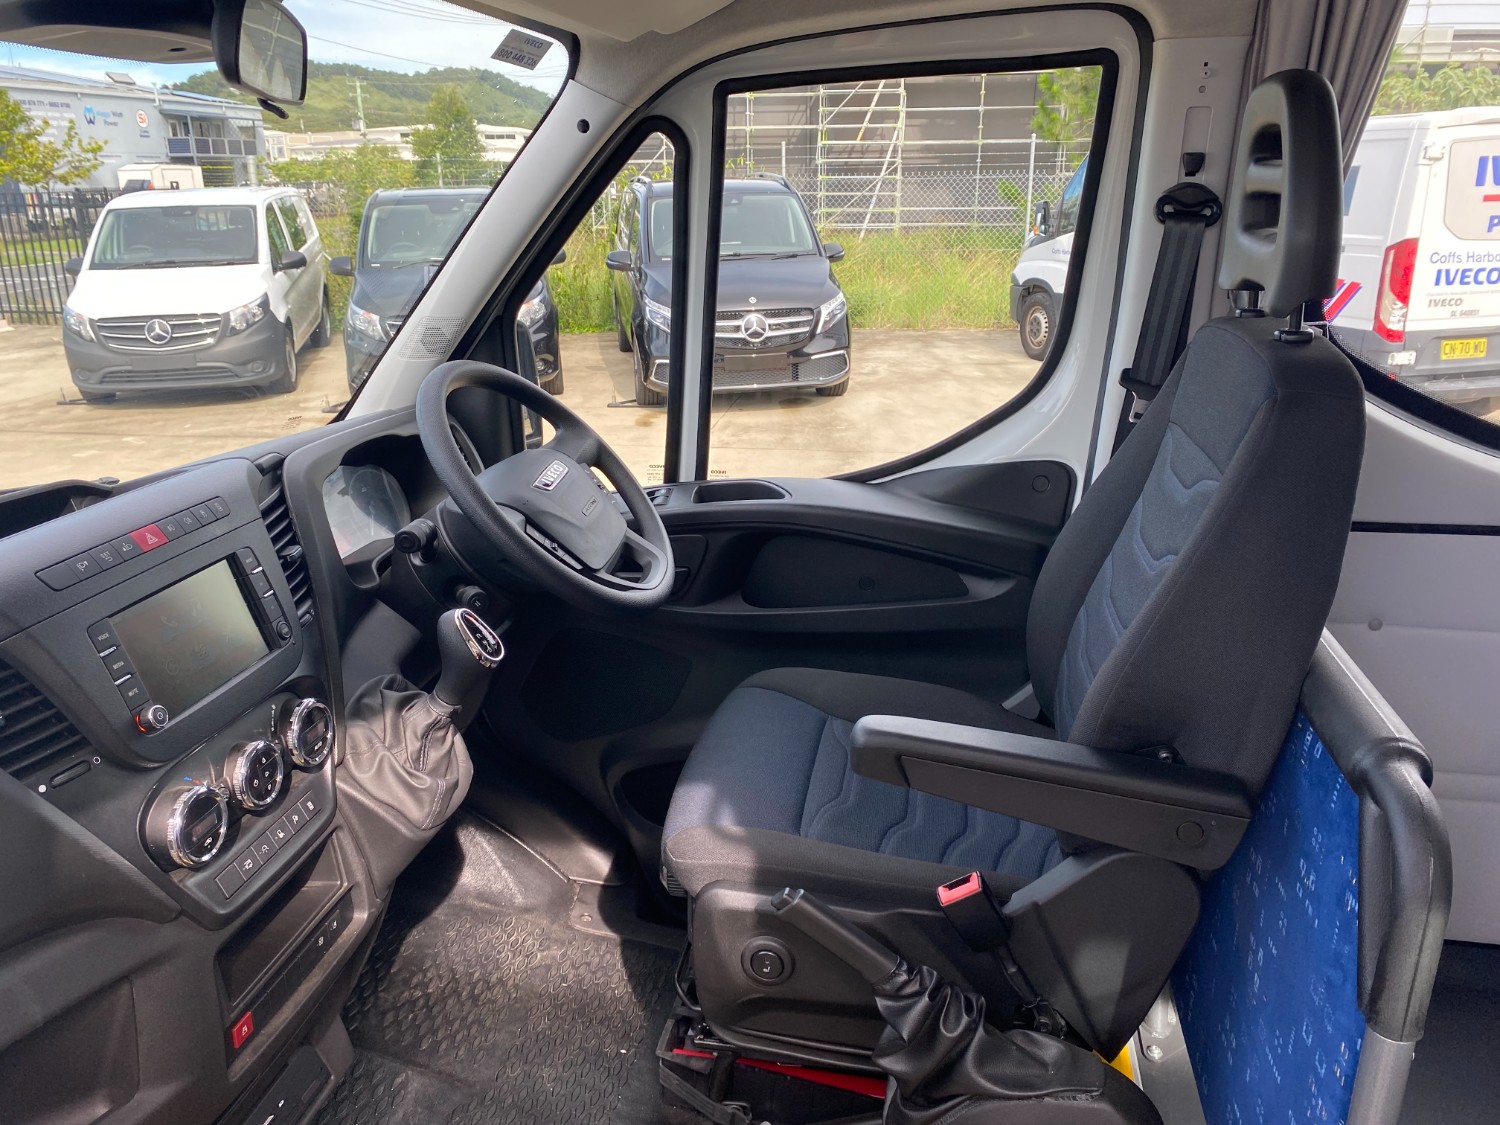 2021 Iveco Daily Bus Image 13